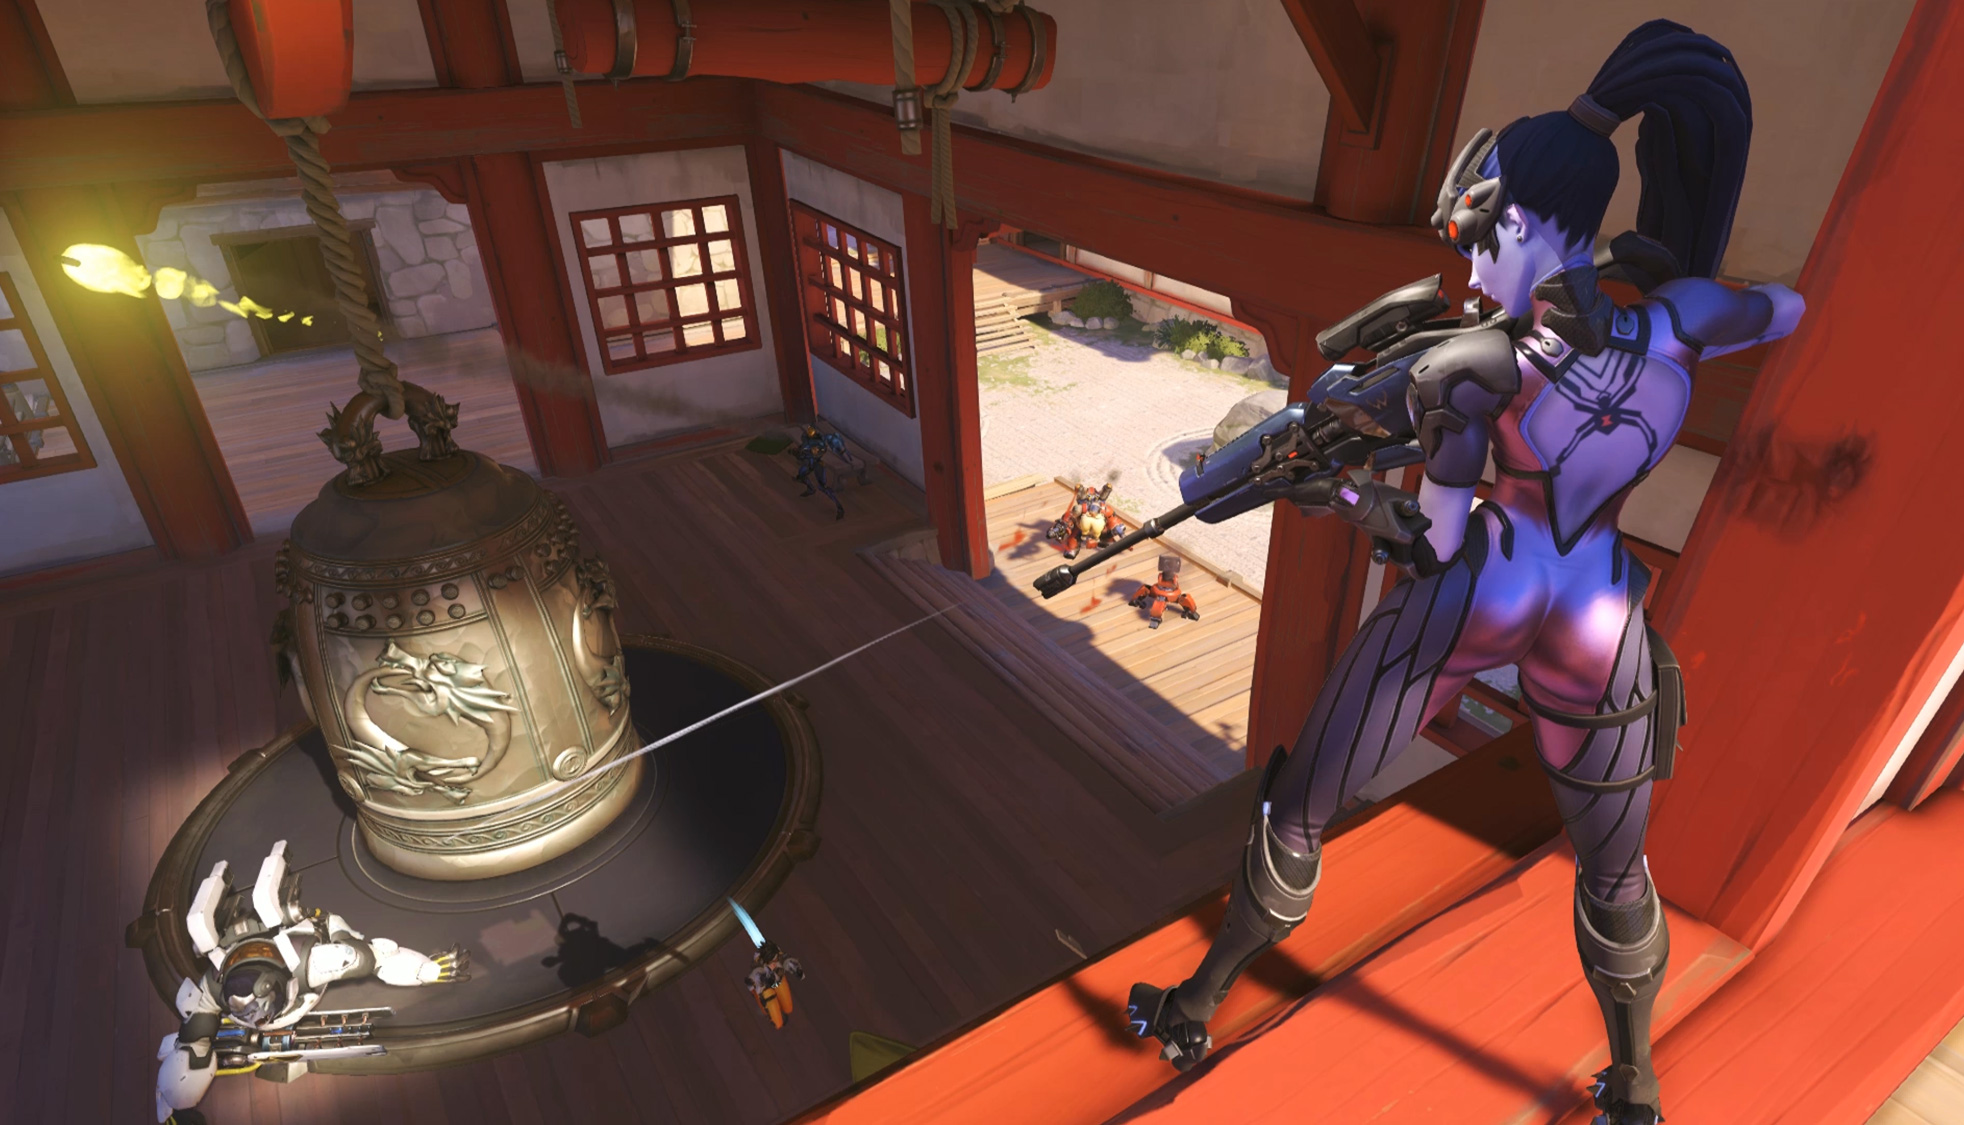 Overwatch’s Director On Competitive Mode, Controversies And The Future